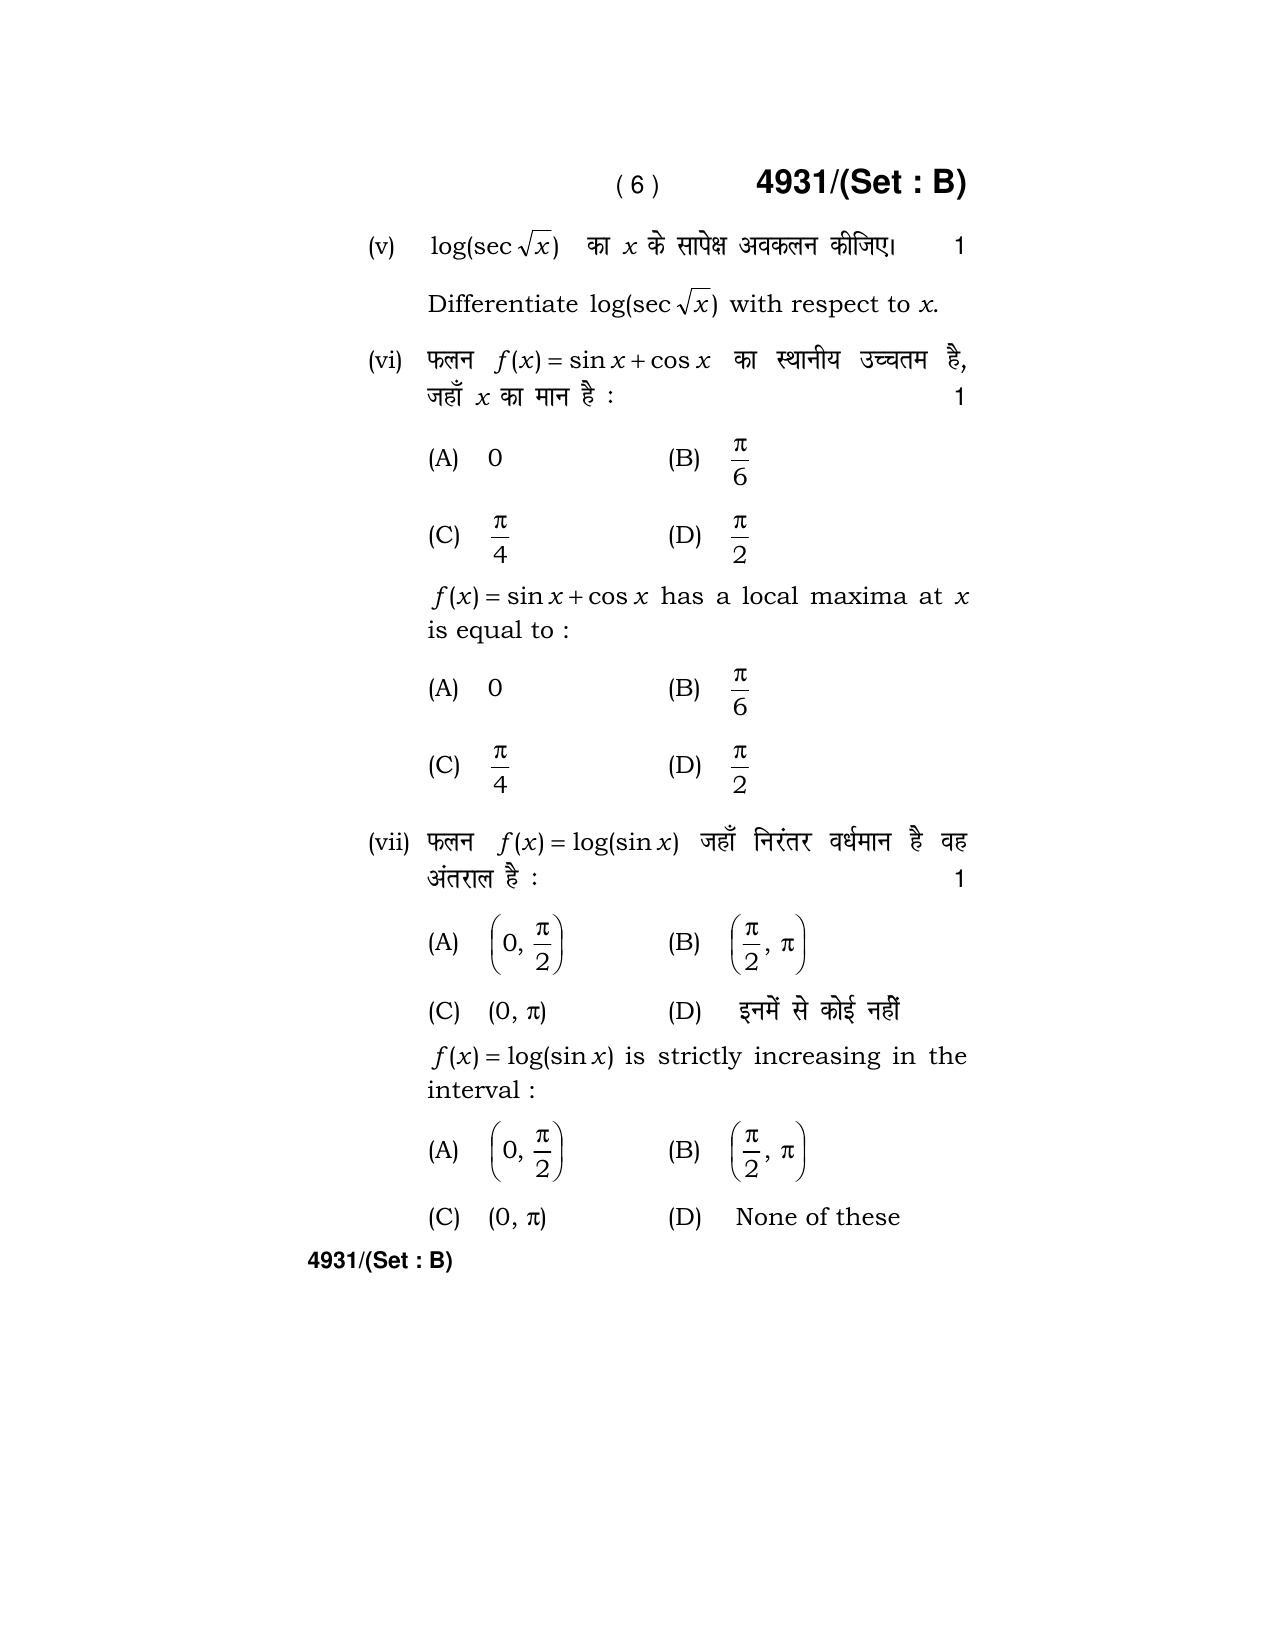 Haryana Board HBSE Class 12 Mathematics 2020 Question Paper - Page 22